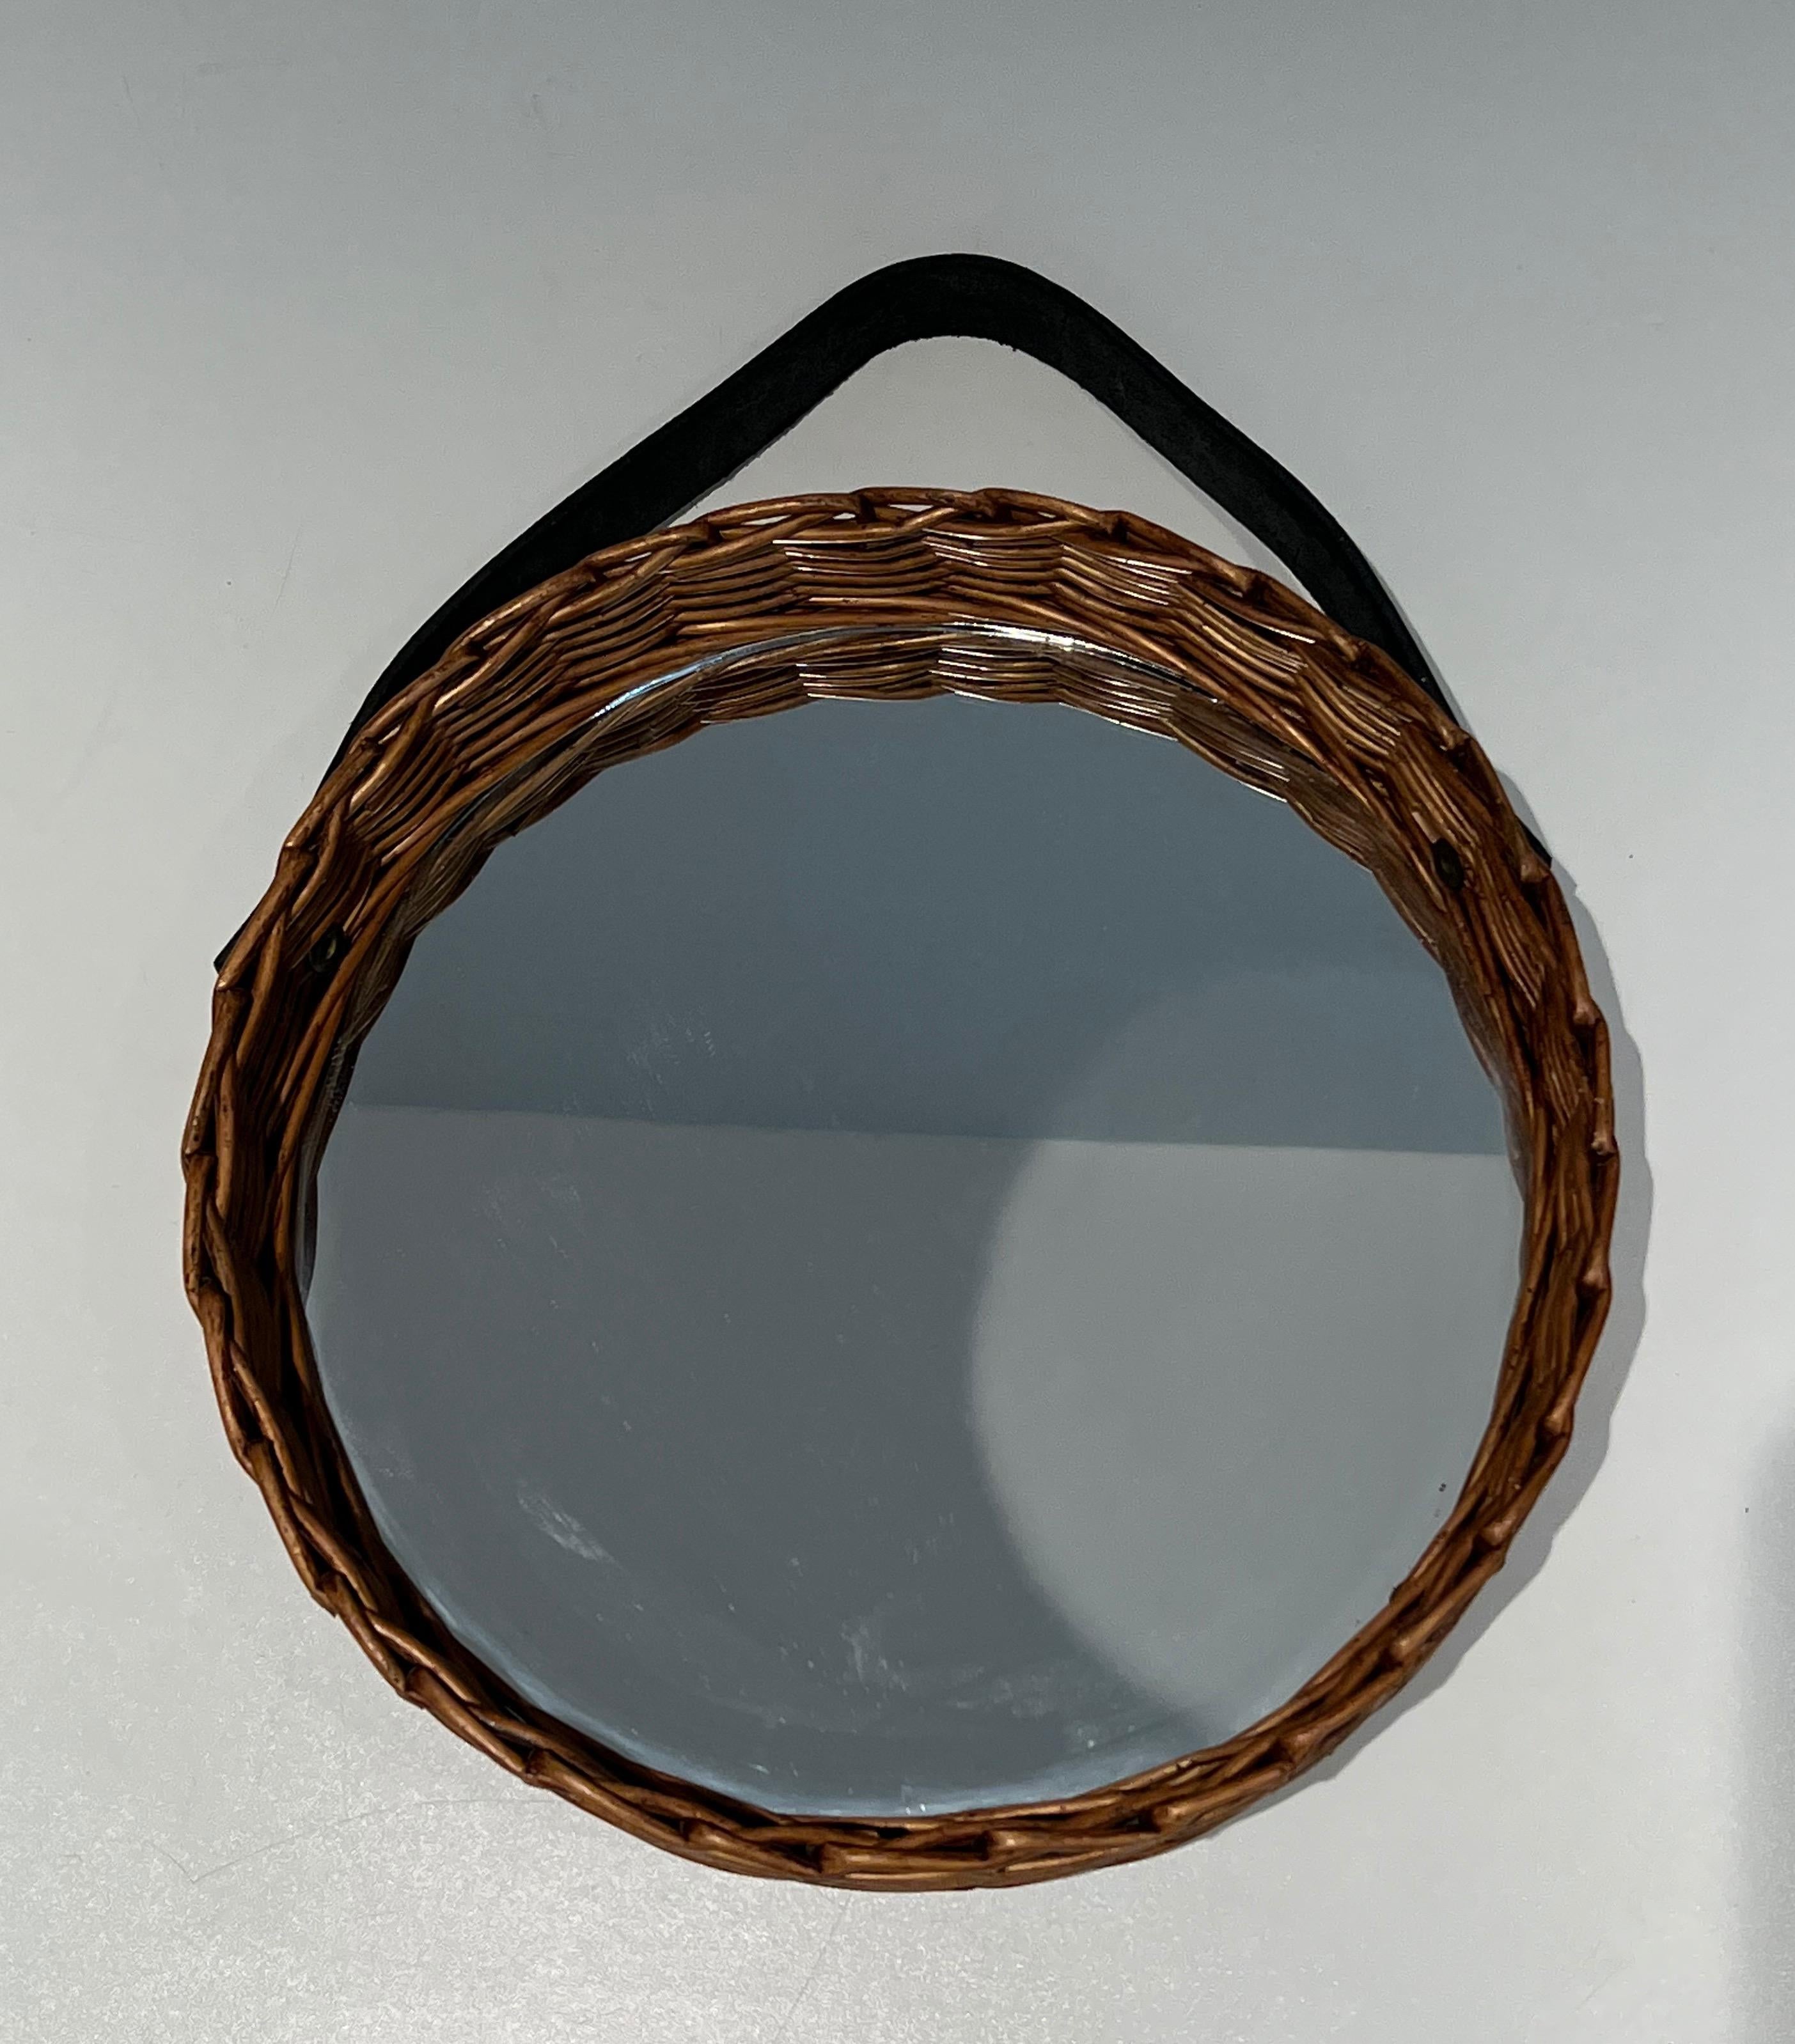 Rattan and Leather Round Mirror, French Work; circa 1950 For Sale 4